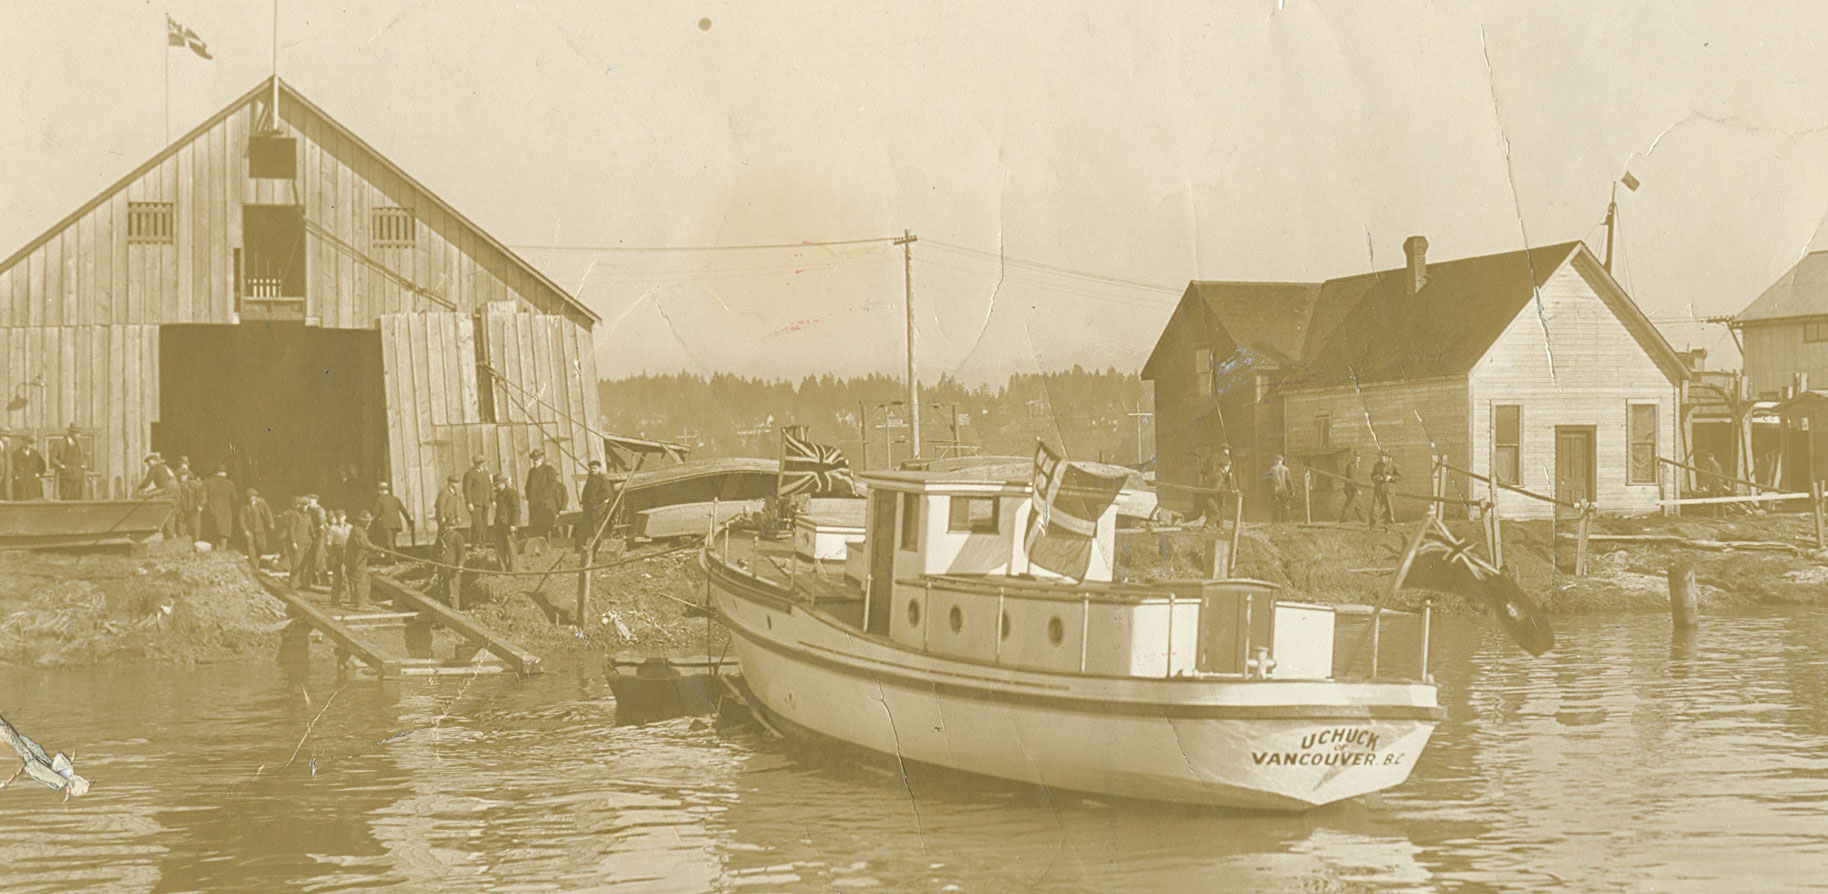 Workers standing in front of a wooden boat shed preparing to bring a boat into a dry dock.